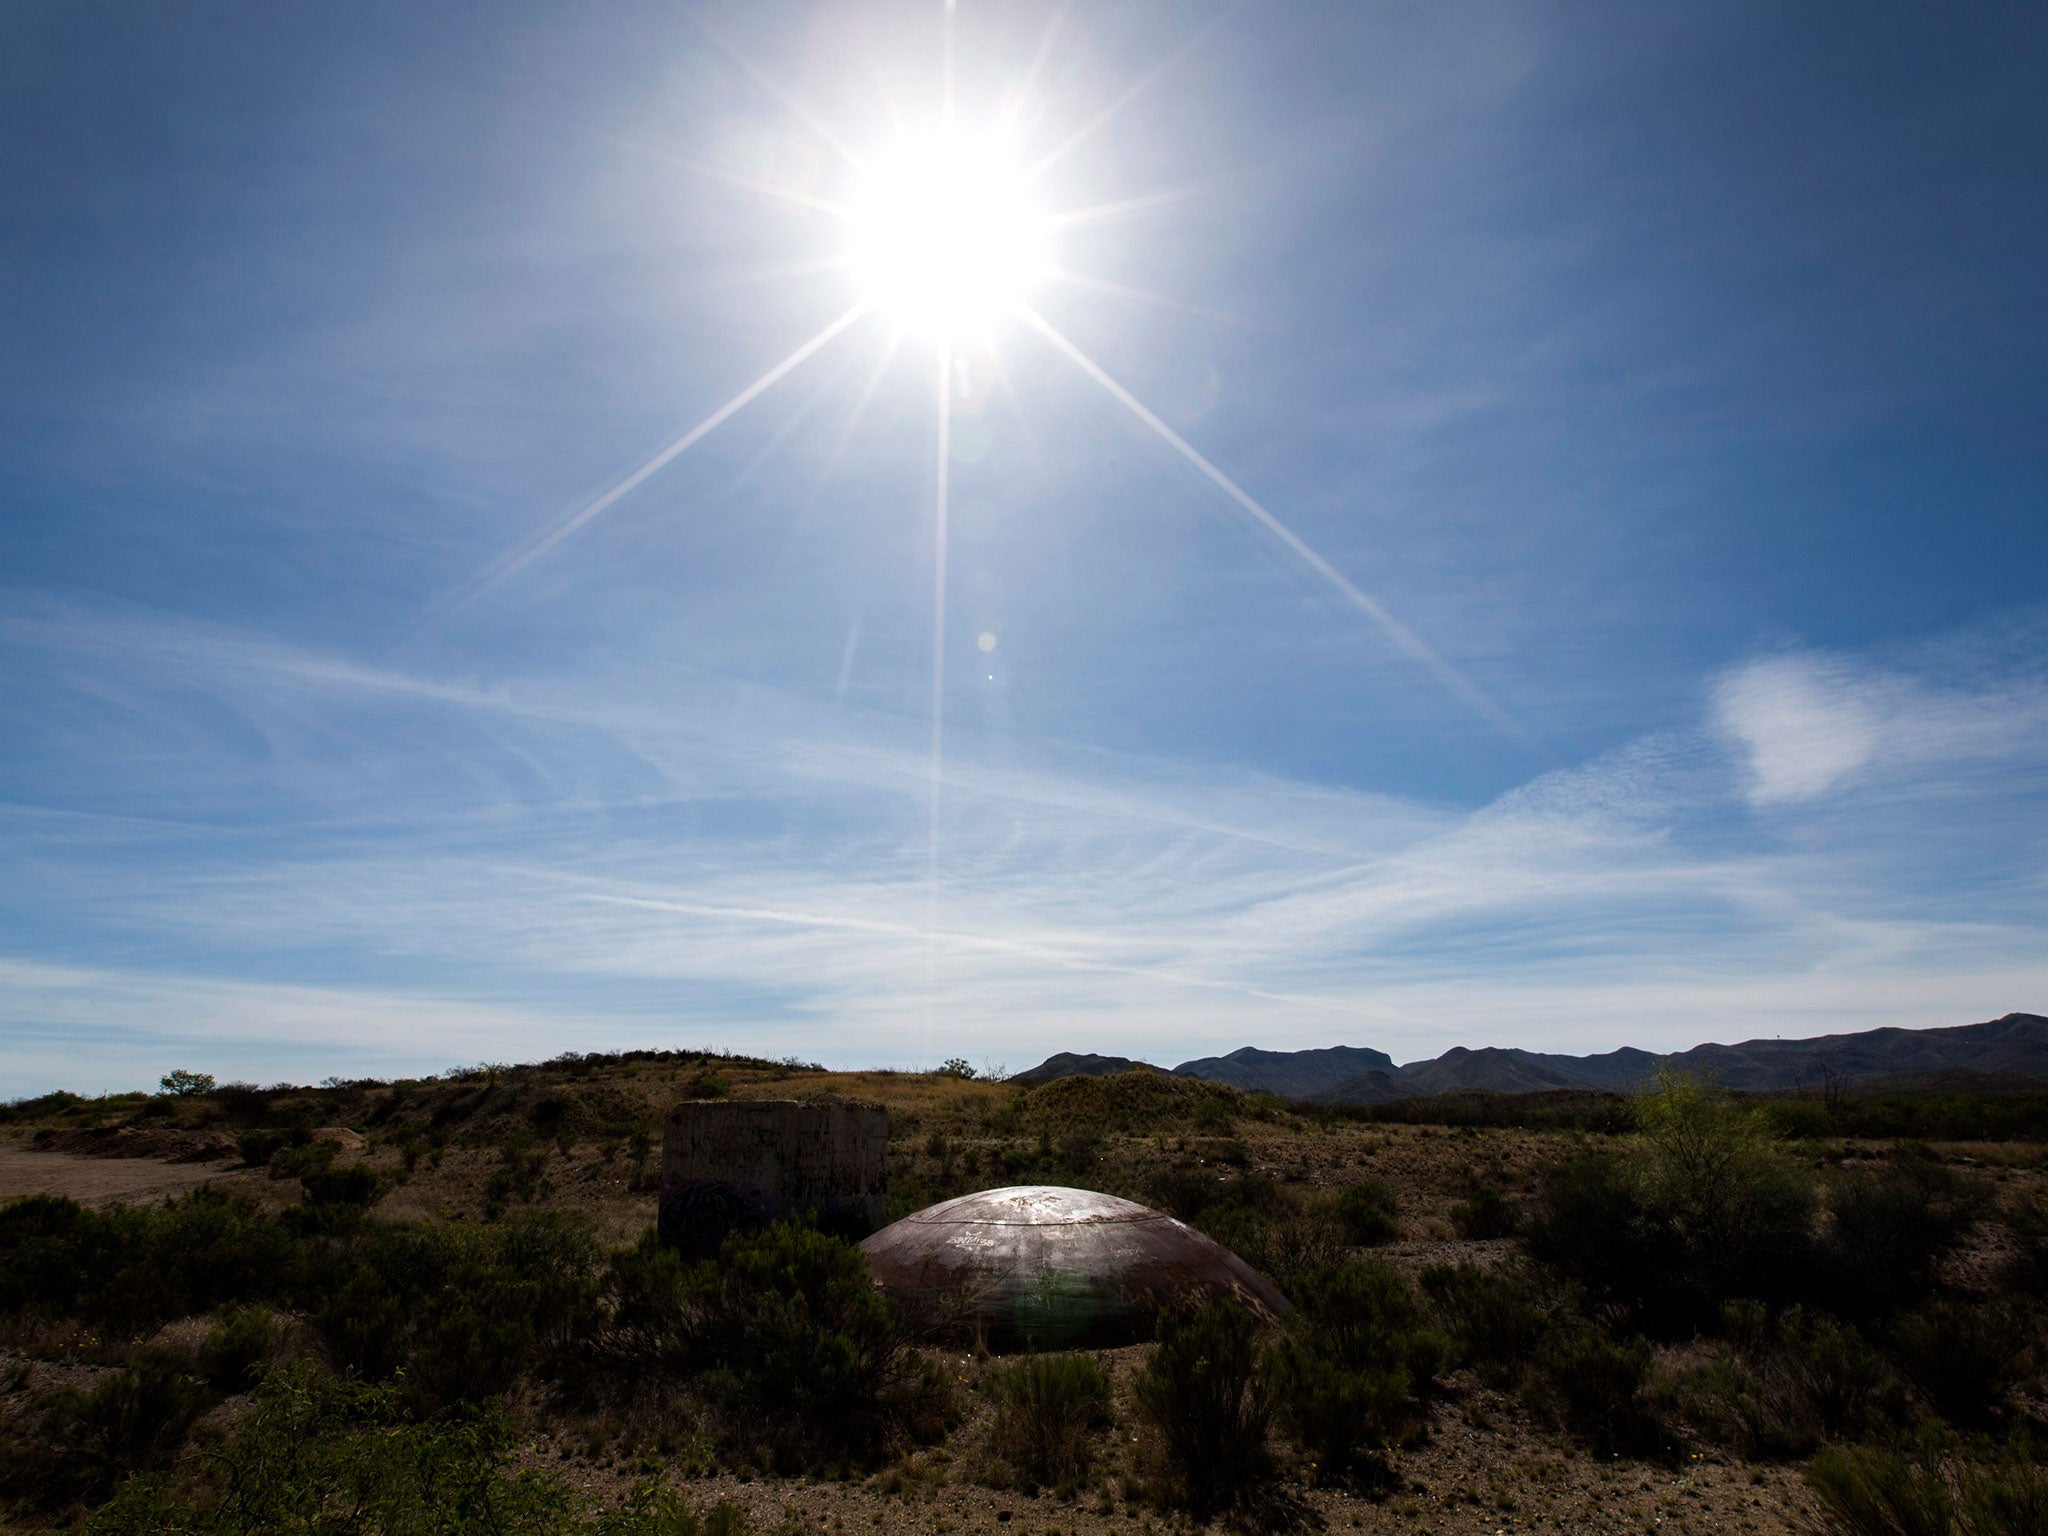 The dome of an abandoned Titan II intercontinental ballistic missile site is seen in the desert outside of Vail, Arizona